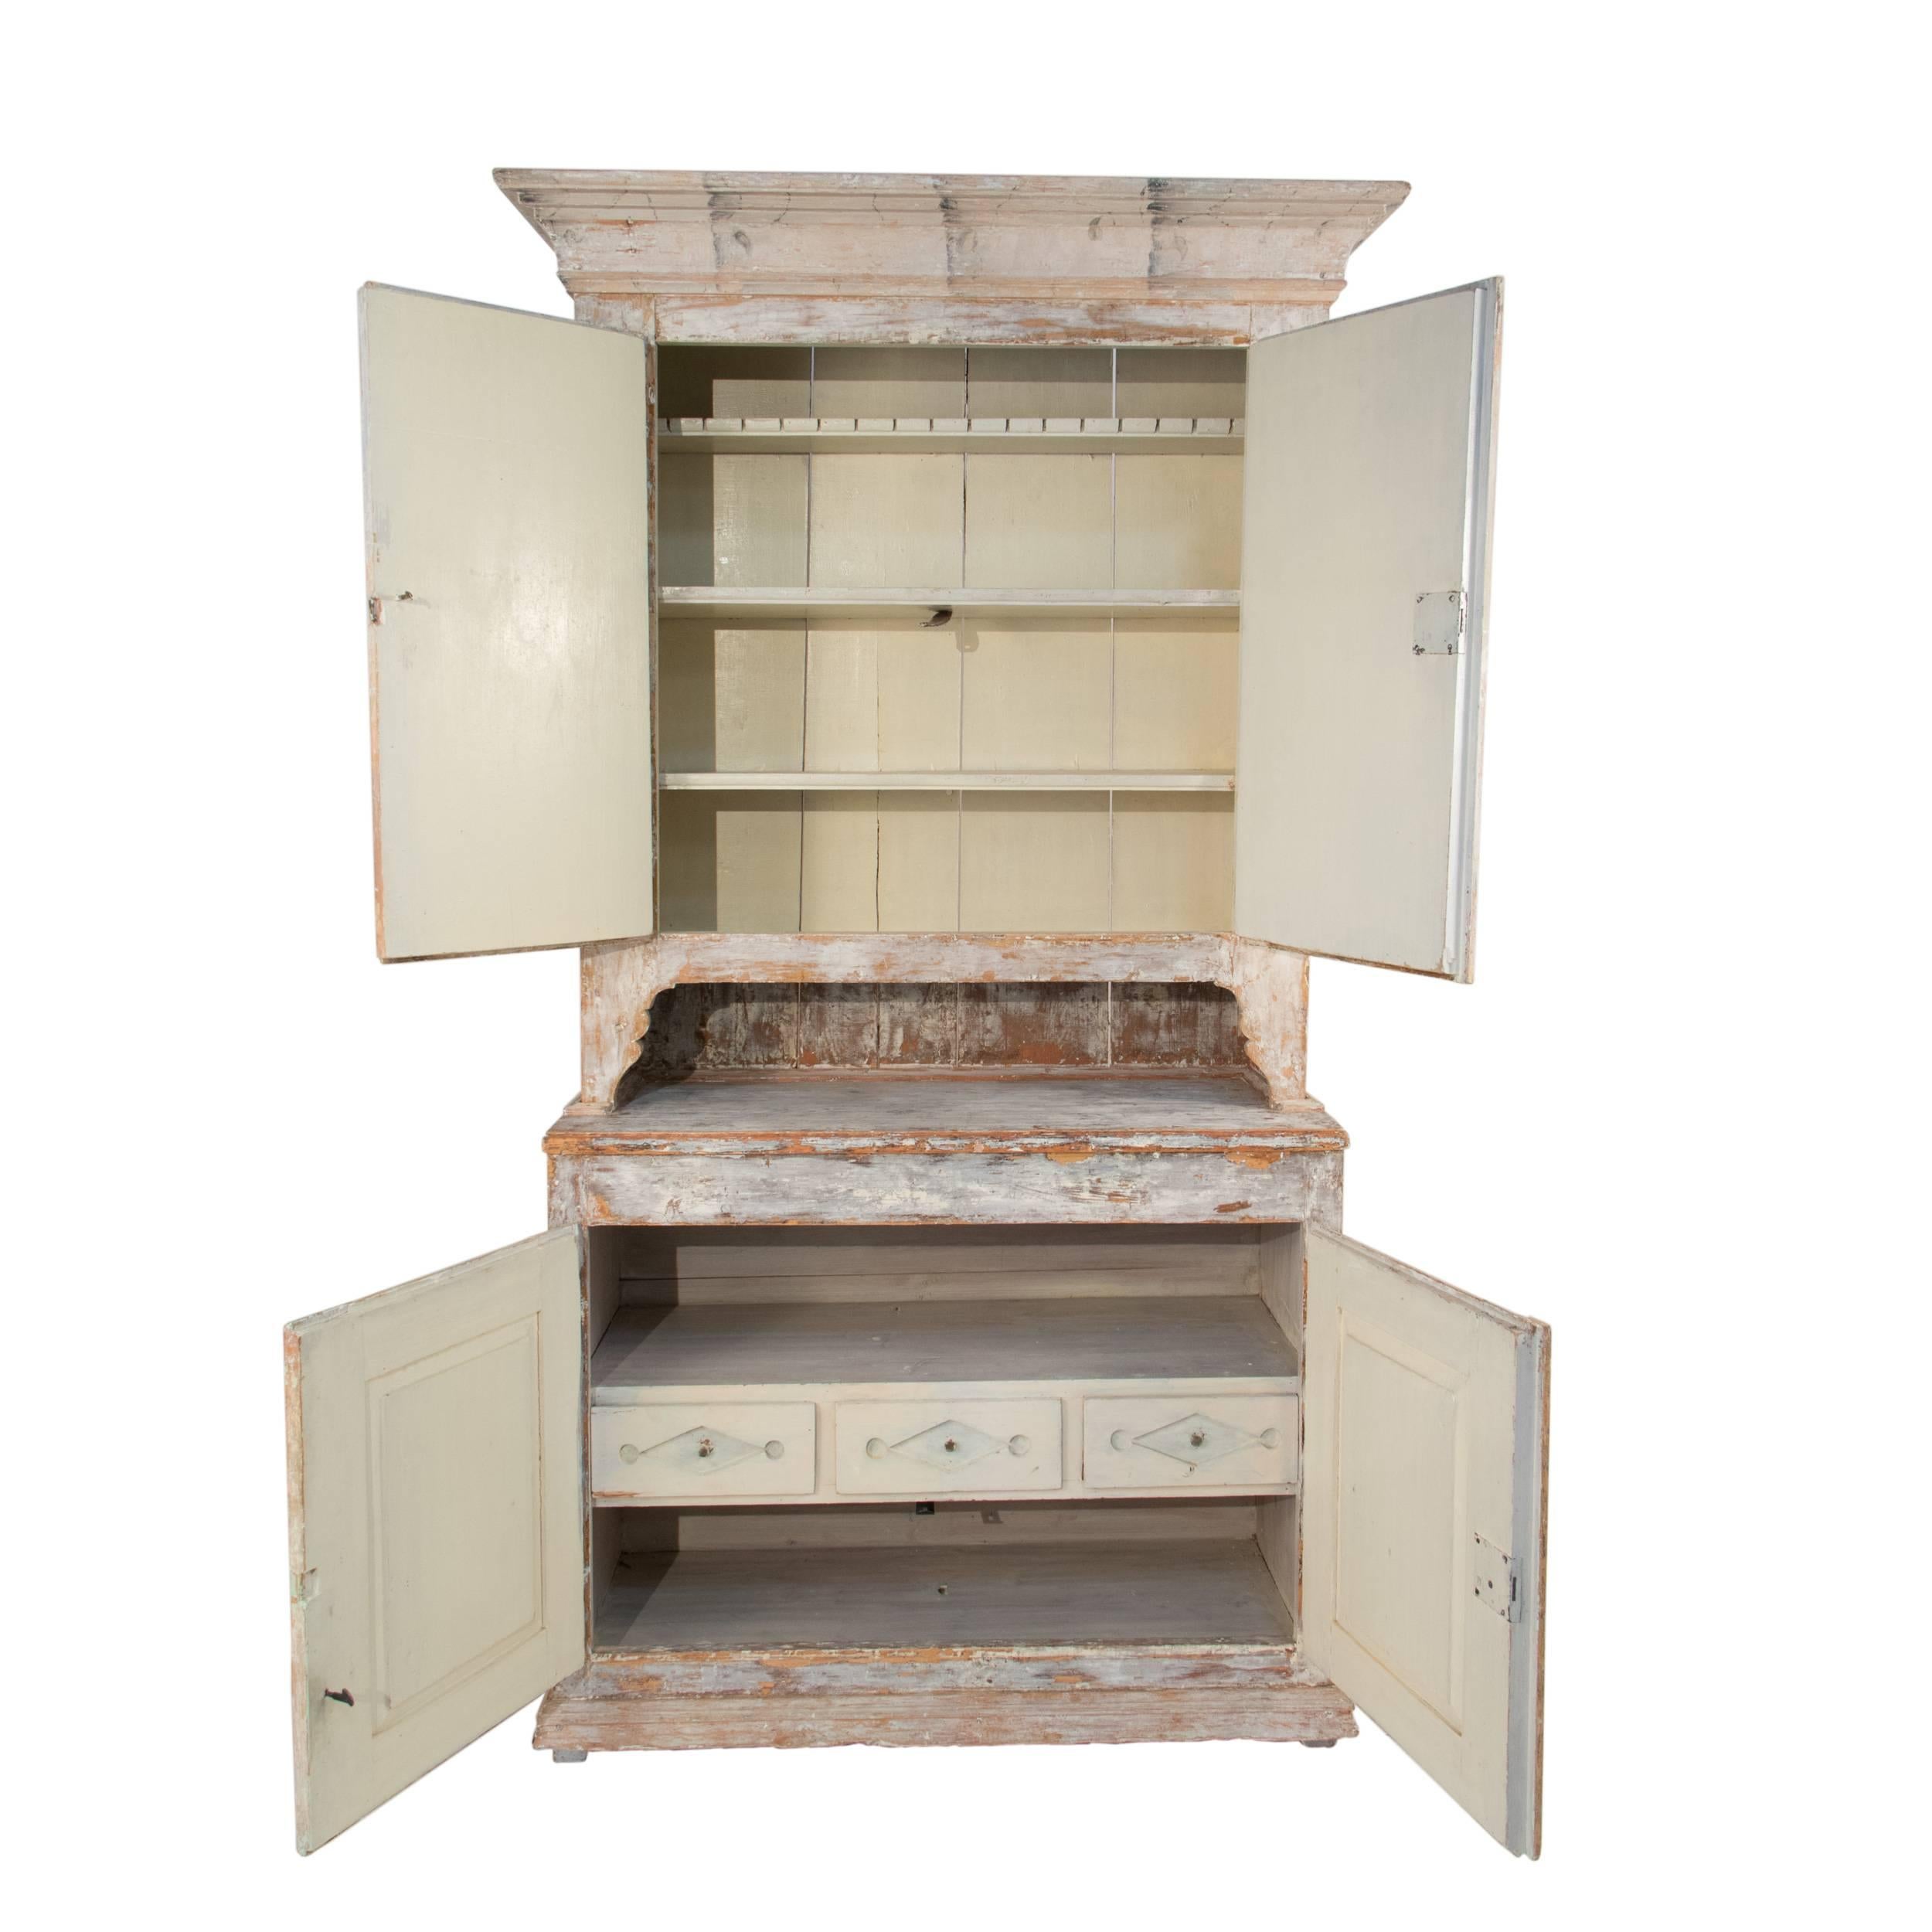 Gustation cabinet in a worn pale grey patina.